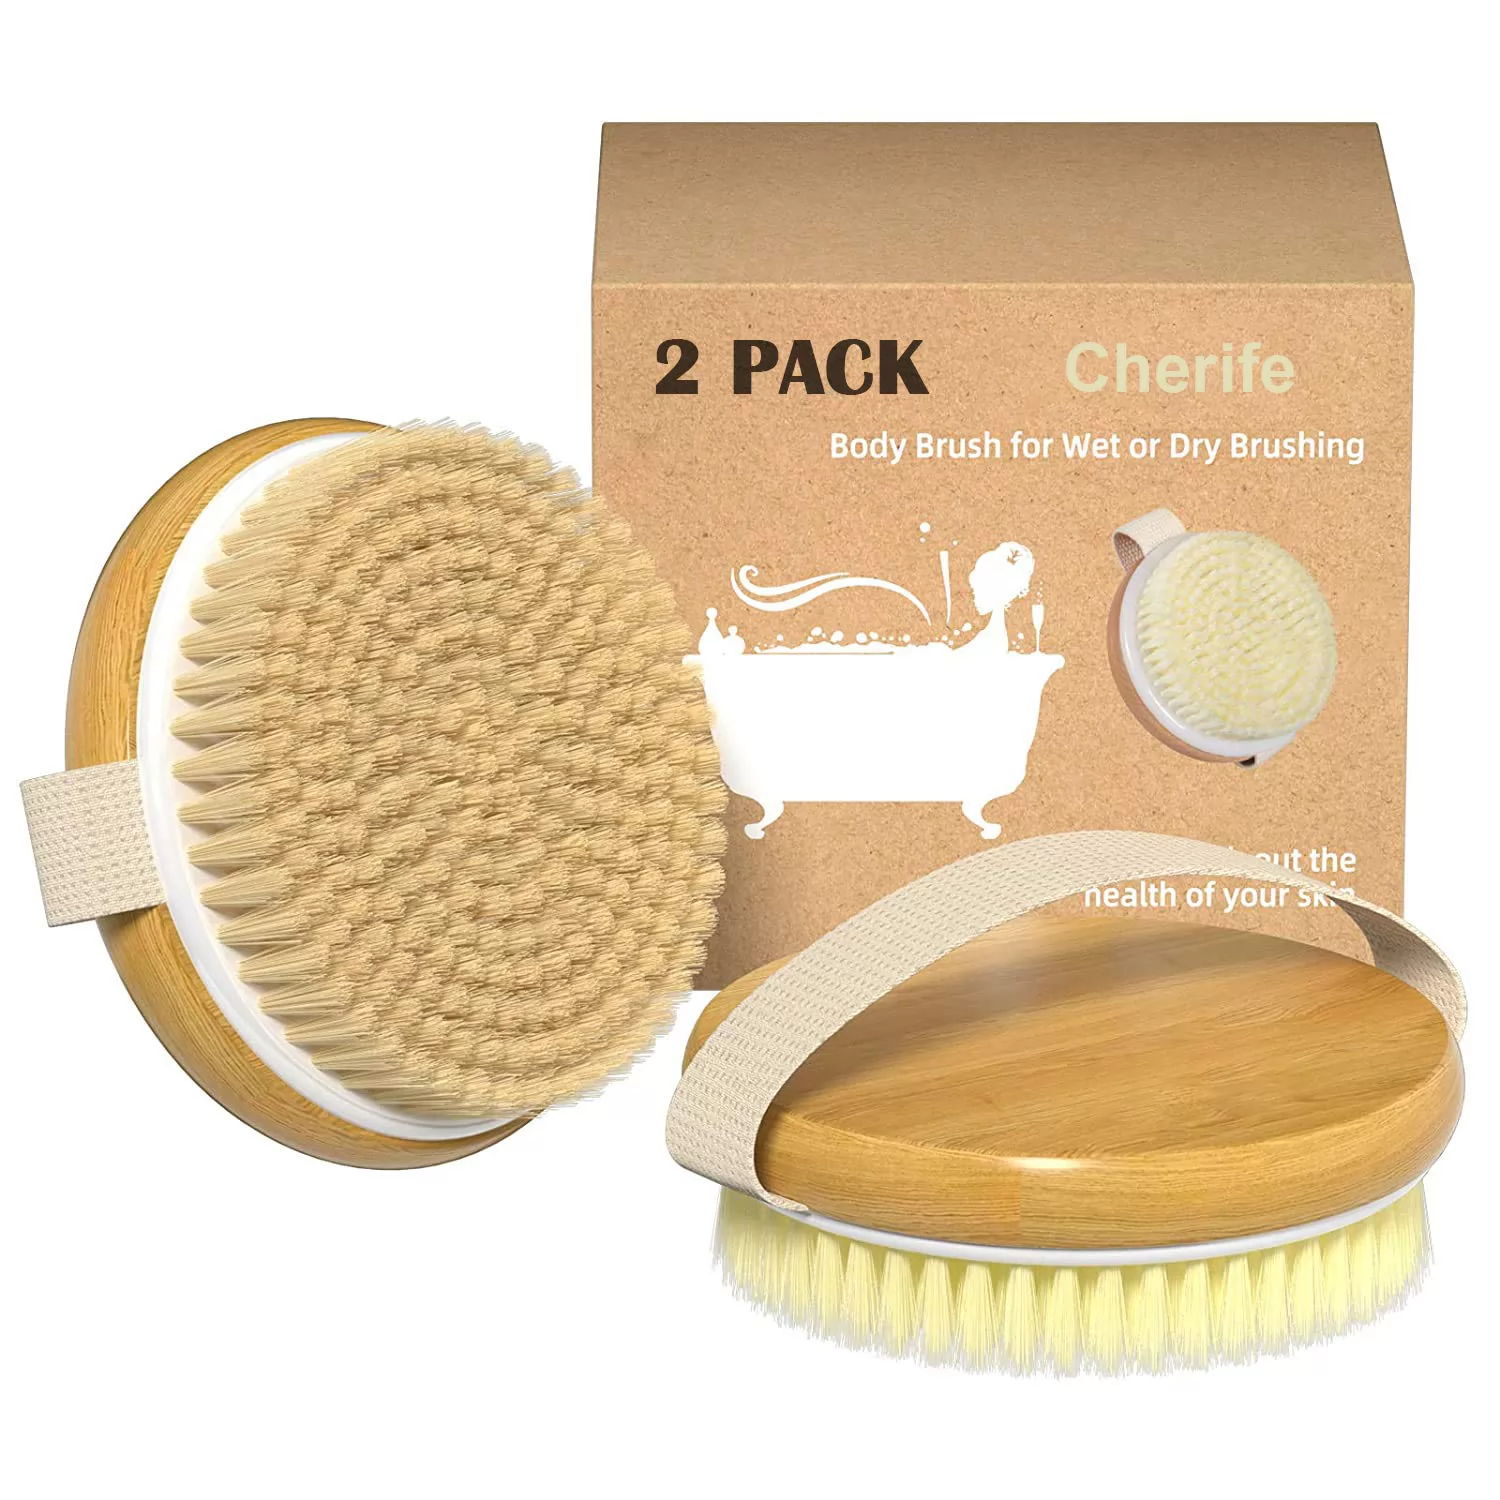 Cherife 2 Pack Dry Body Brush, Shower Brush Wet and Dry Brushing, Body Scrubber with Soft and Stiff Bristles, Suitable for All Kinds of Skin